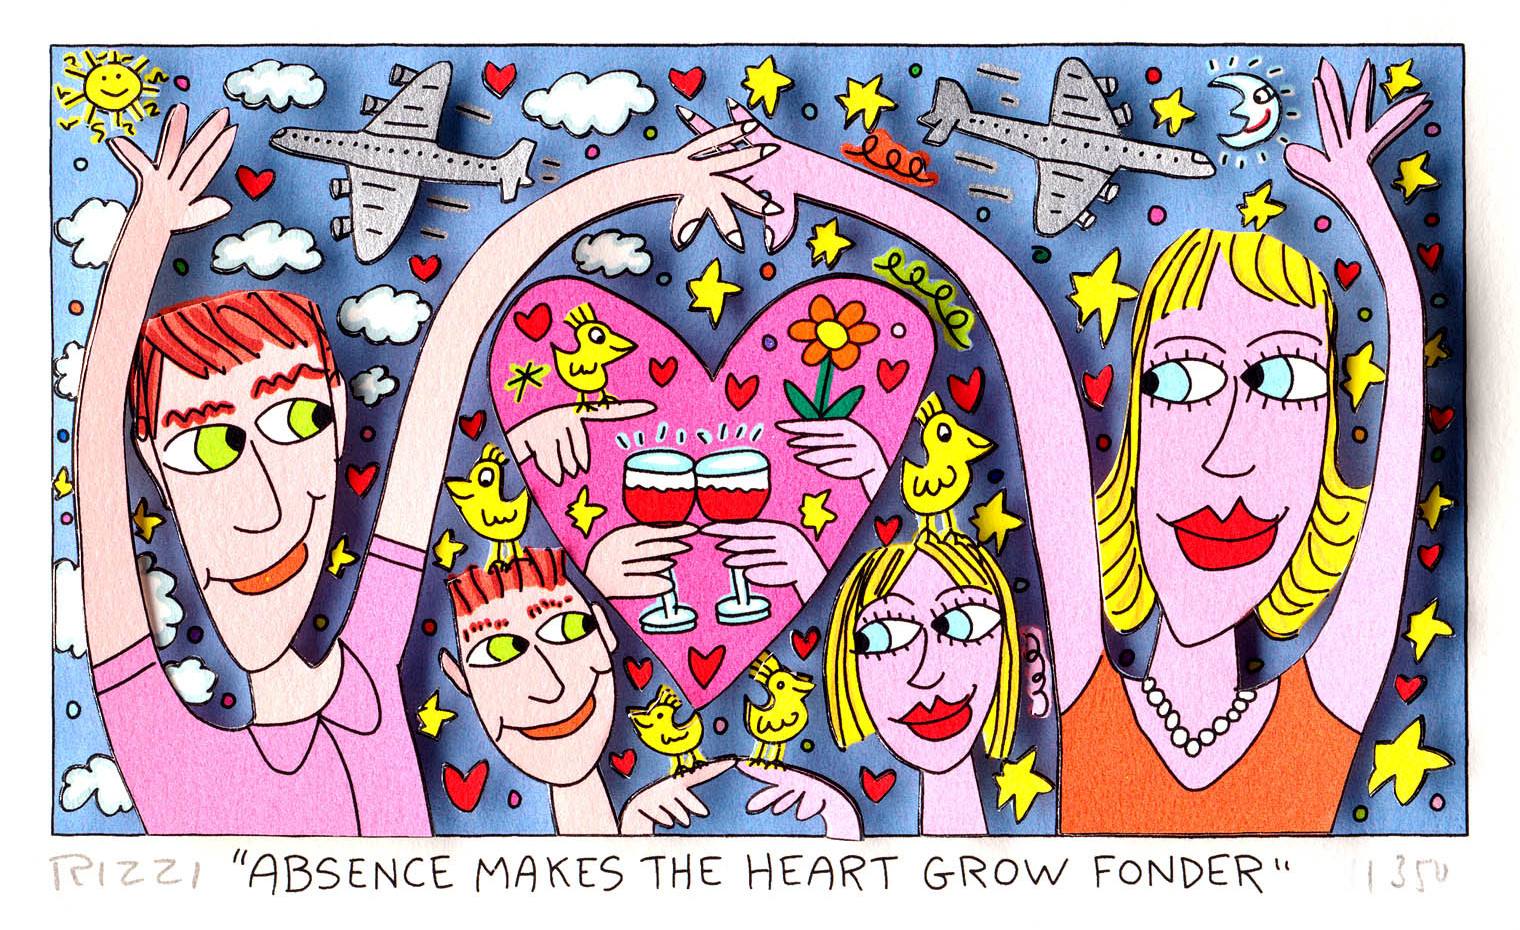 Absence Makes the Heart Grow Fonder